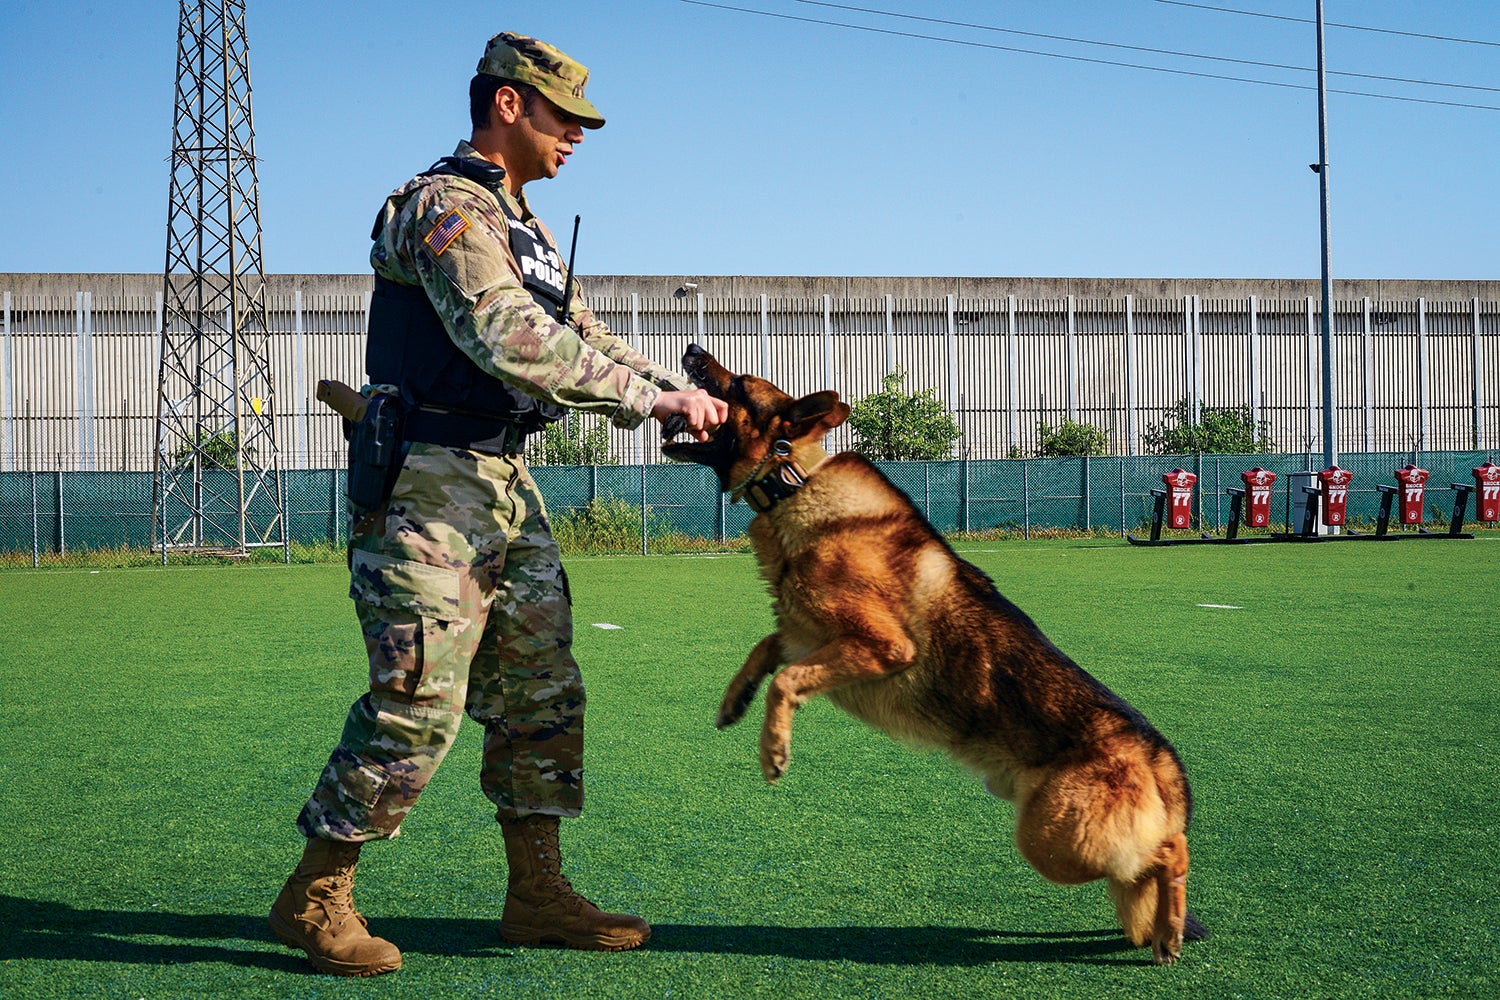 Sgt. Patrick Harrington of the 18th Military Police Detachment puts his military working dog, Aran, through obedience drills in Vicenza, Italy. (Credit: U.S. Army/Dario Cortese)